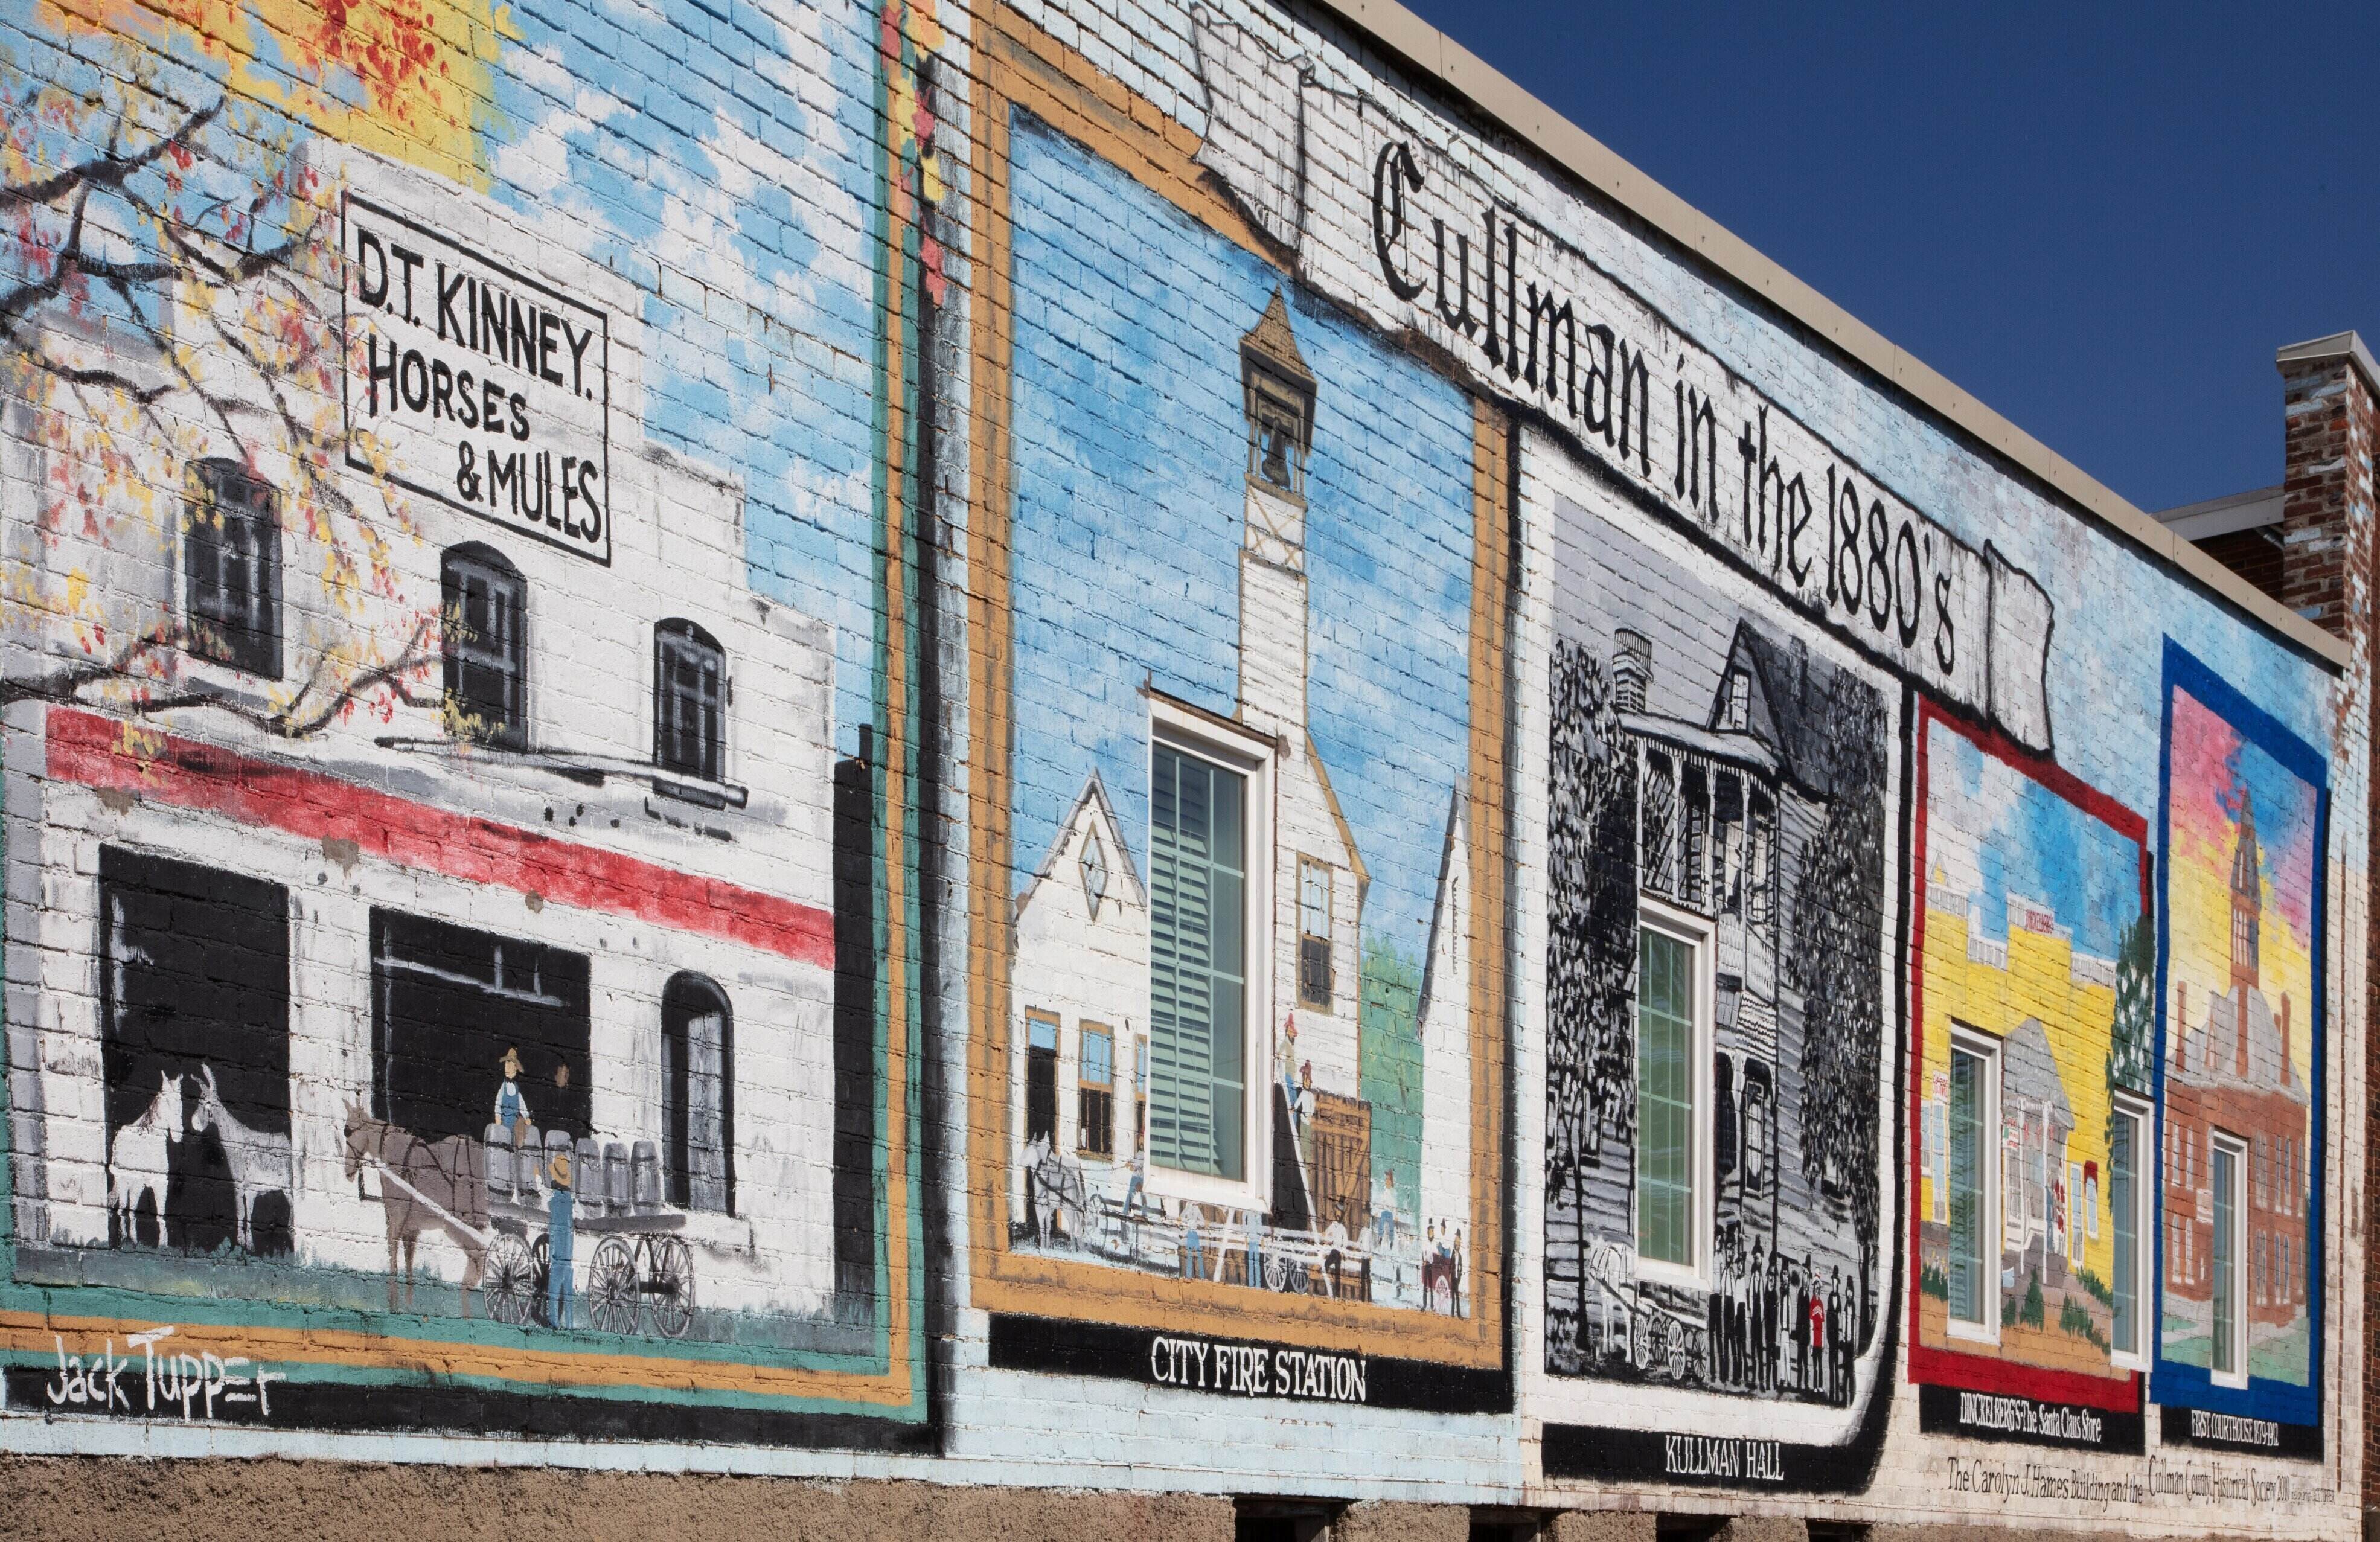 Wall mural of Cullman in the 1880s in Cullman County by artist Jack Tupper, 2010 